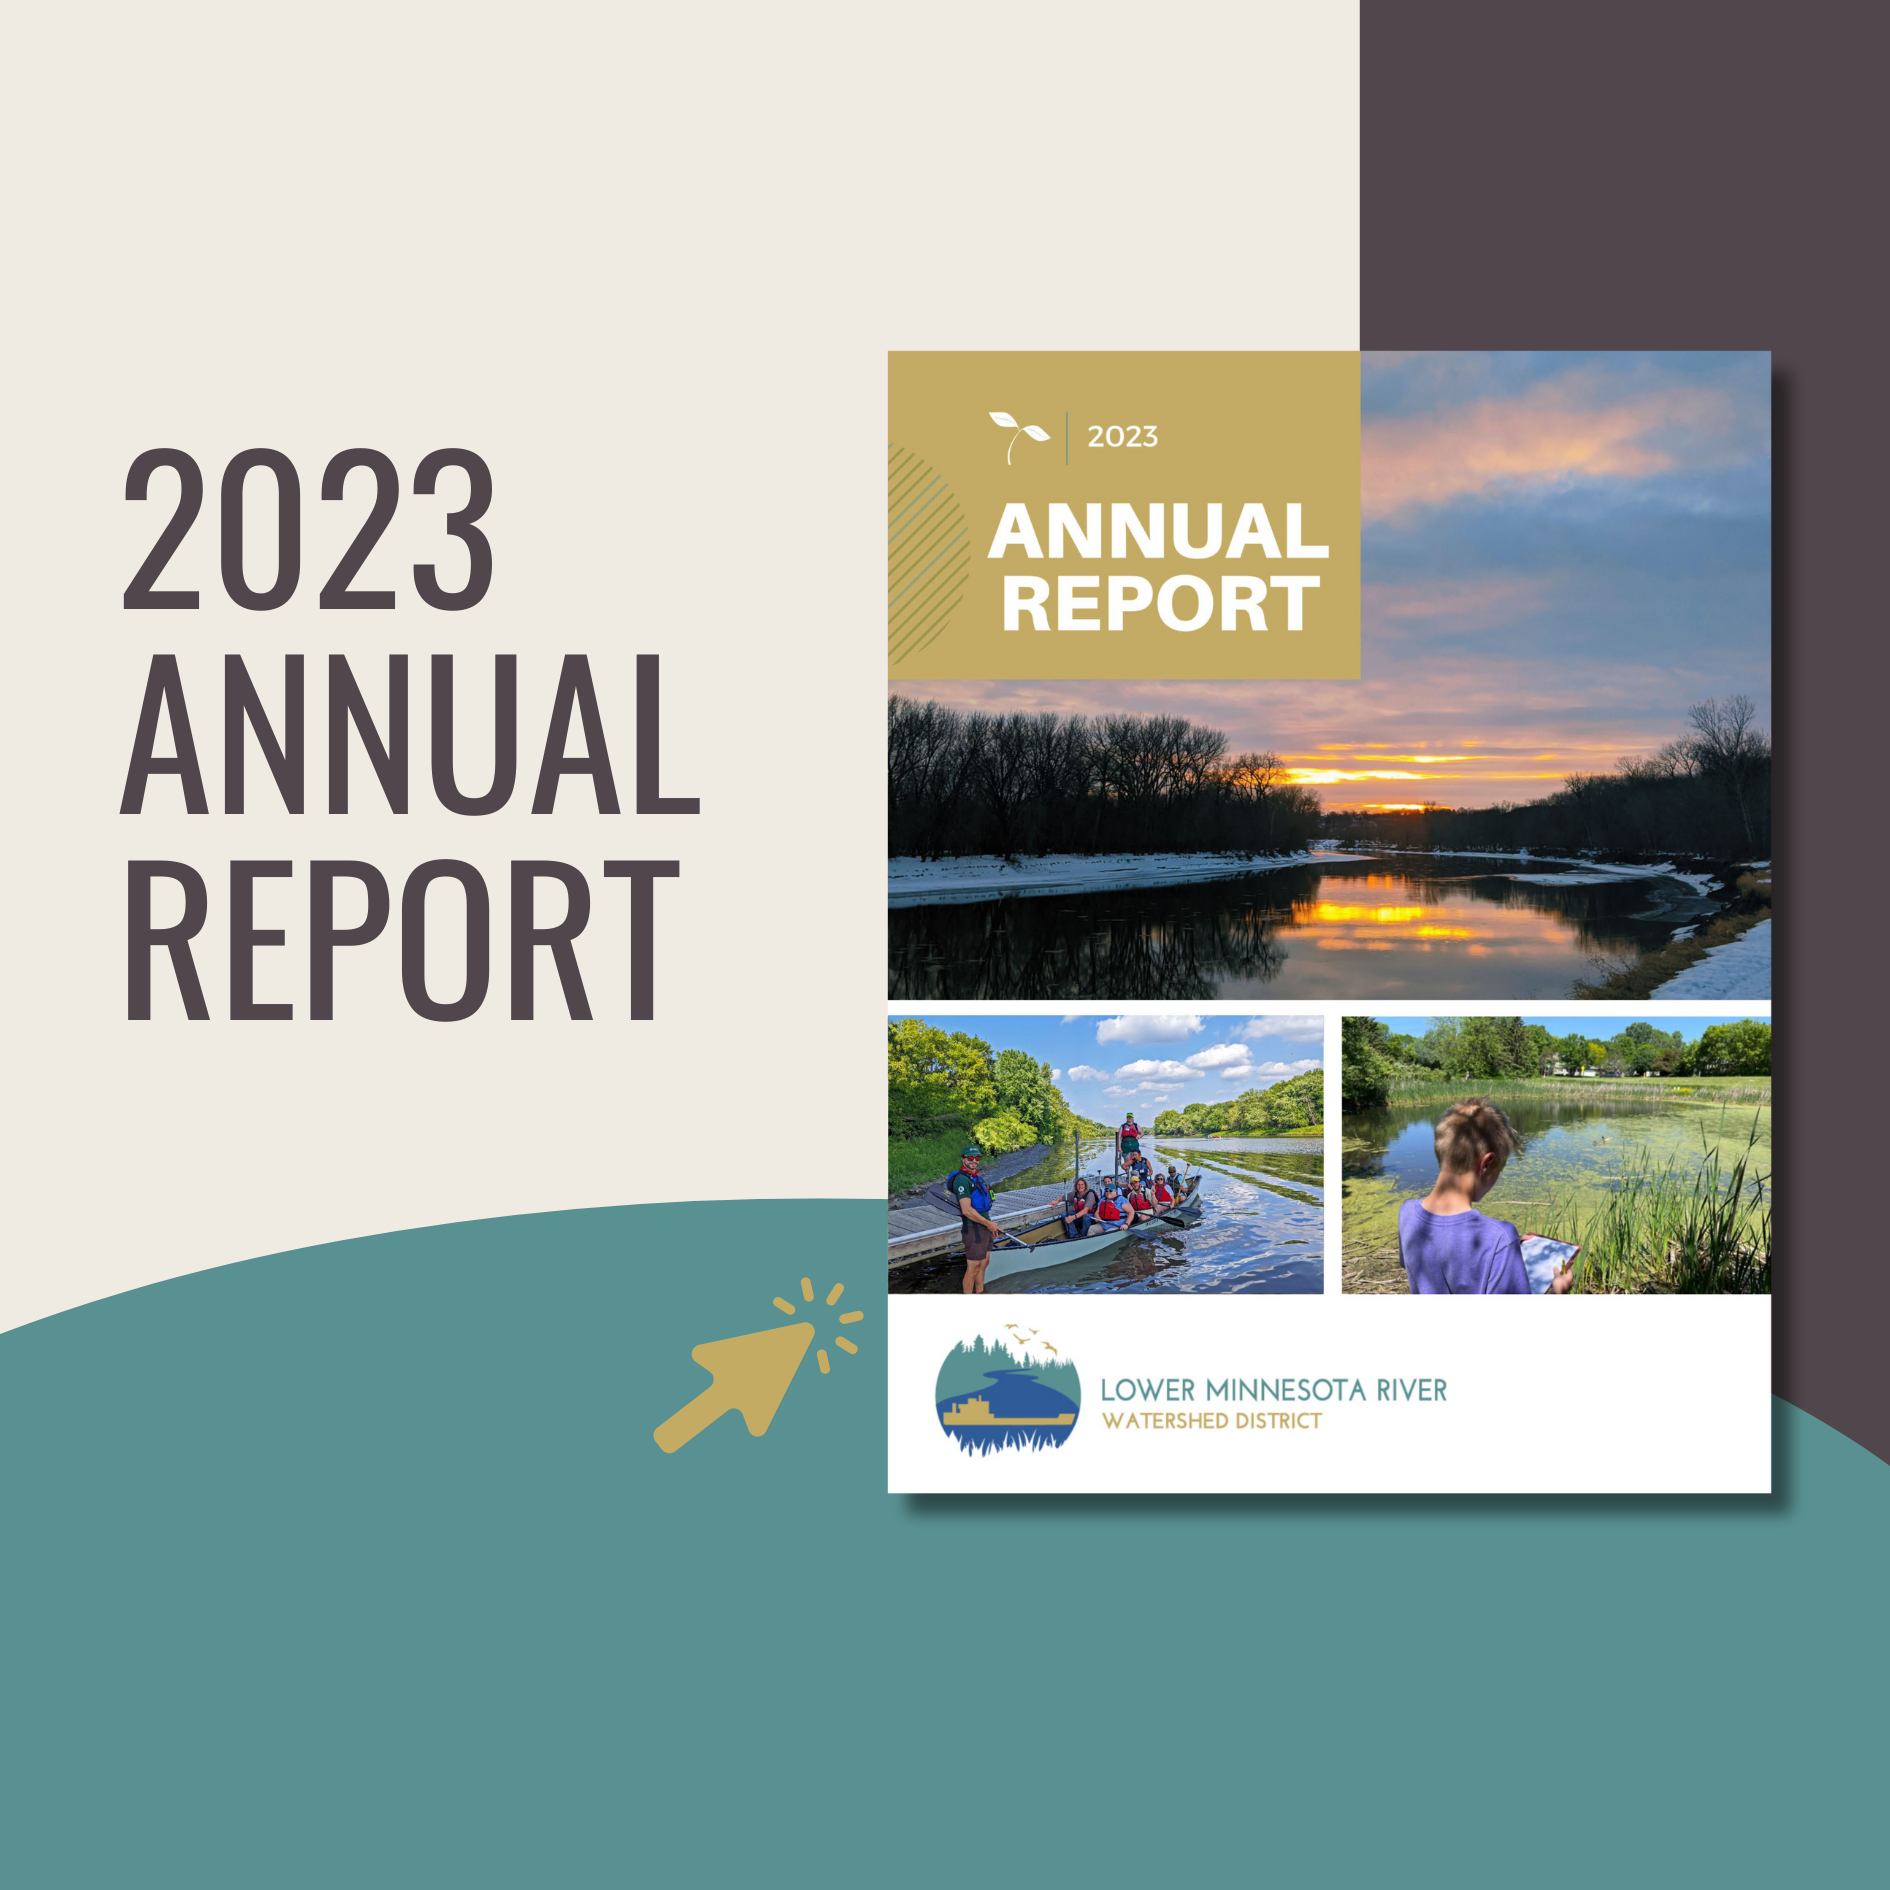 LMRWD_Annual_Report_Release_3.png